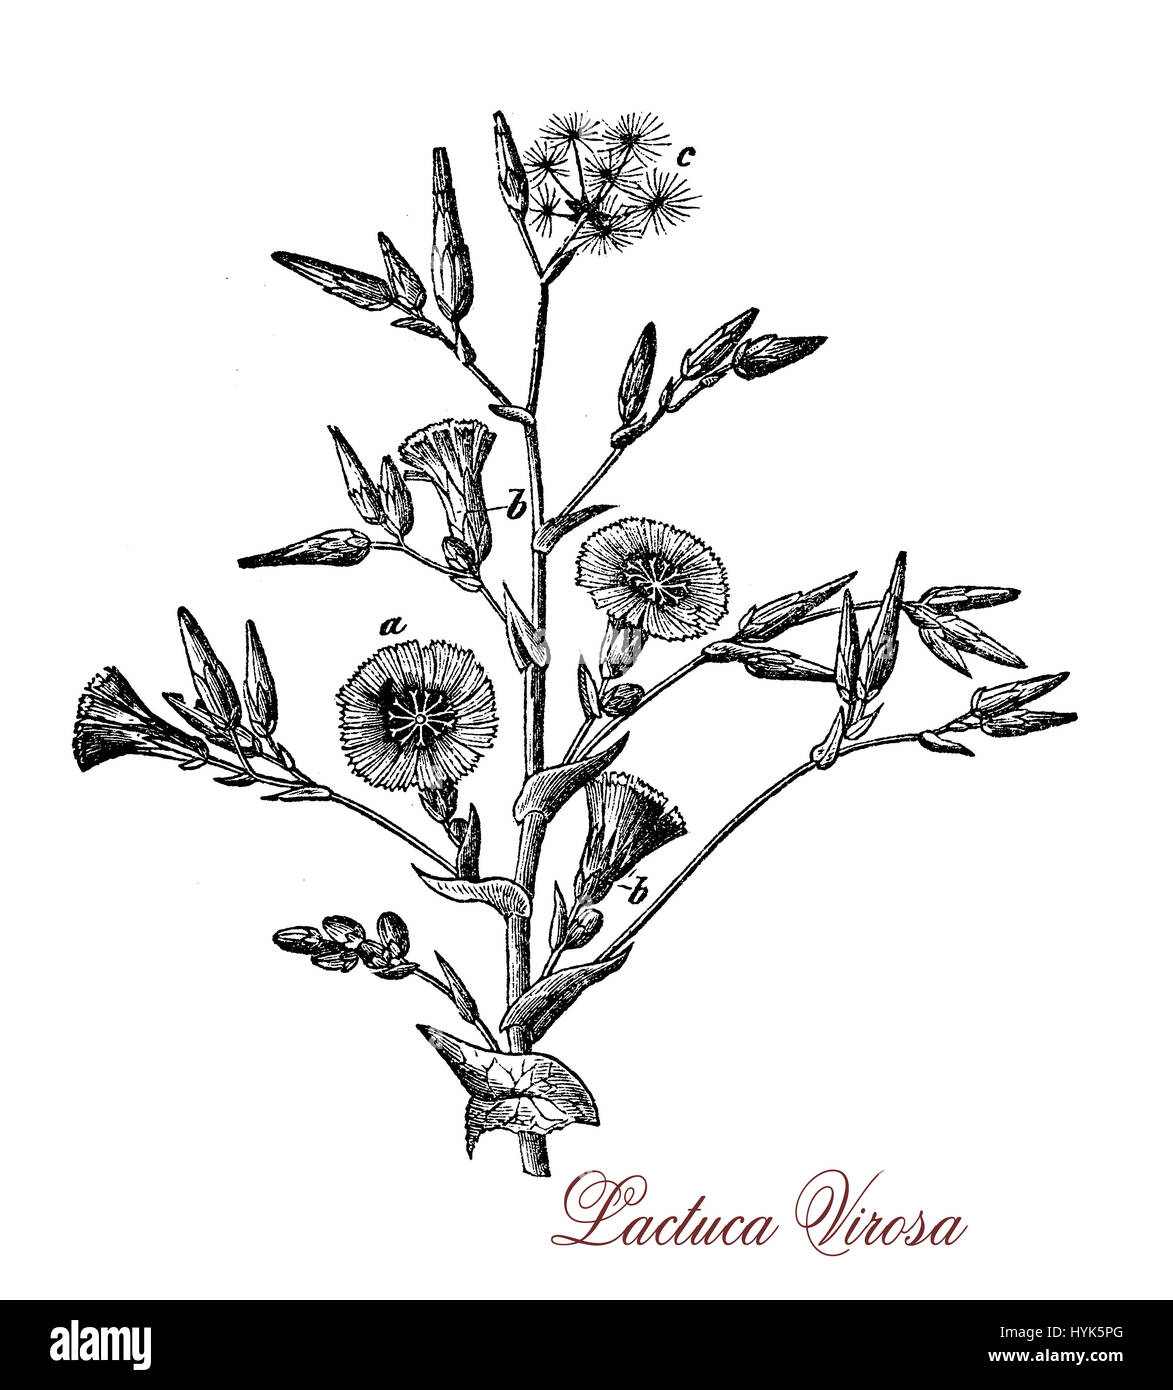 Botanical XIX century engraving of Lactuca virosa or wild lettuce, plant of the lactuca genus used in the 19th century by physicians for its hypnotic and sedative effects when opium could not be obtained Stock Photo